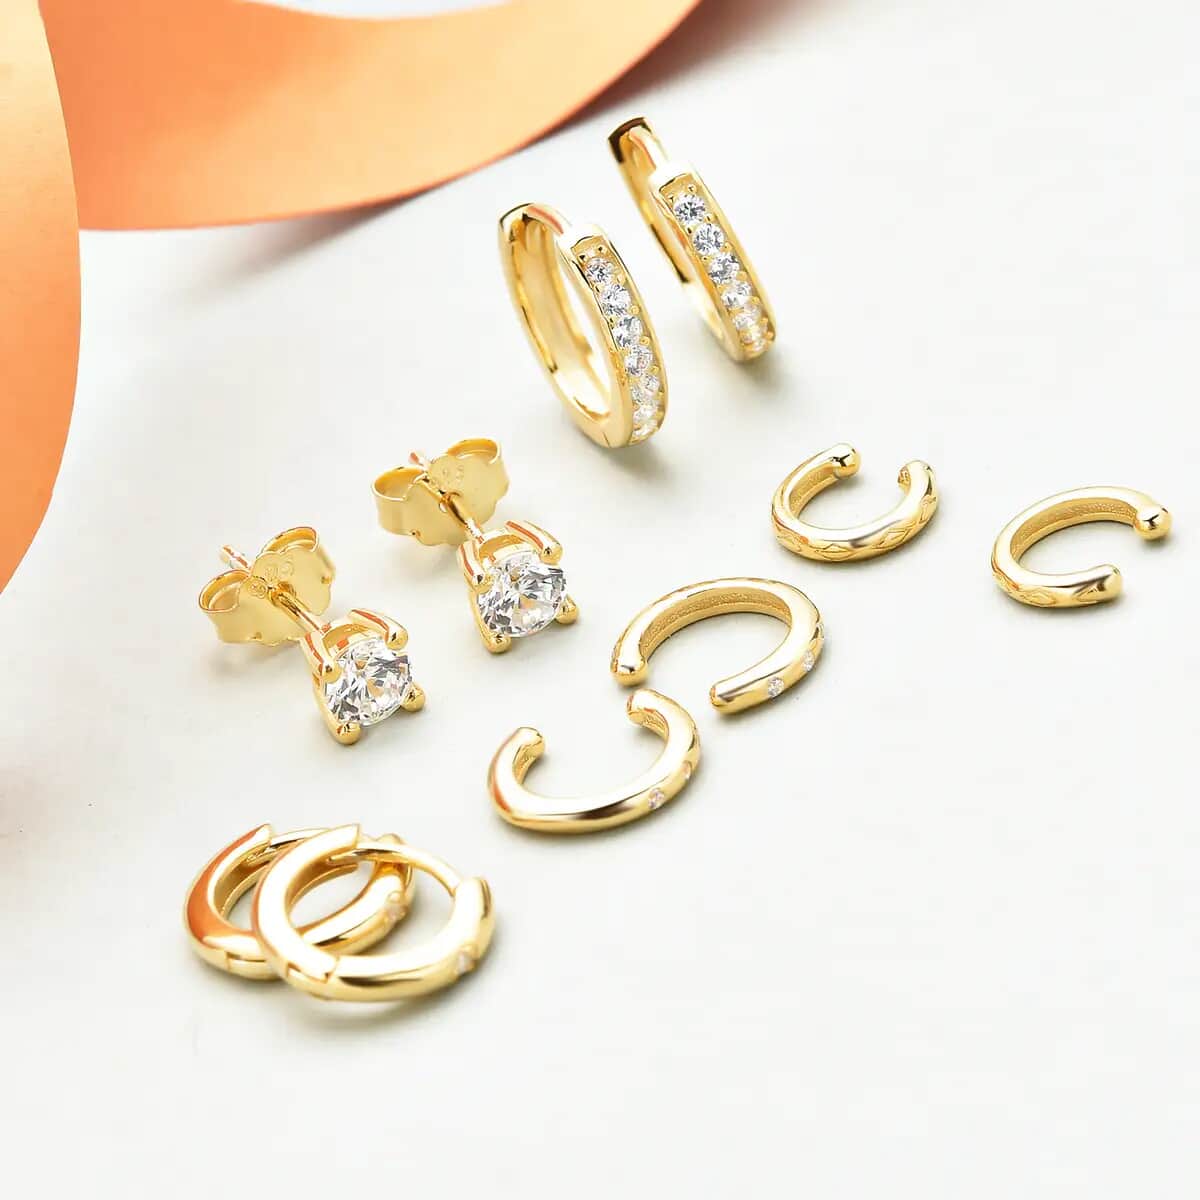 Ear Party, Set of 5 Simulate Diamond Earring Pairs, 1 Heart Studded Huggie Hoops, 1 Studded Huggie Hoops, 1 Tribal Pattern Ear Cuffs, 1 Plain Ear Cuffs, 1 Studs in 14K RG Over Sterling Silve image number 5